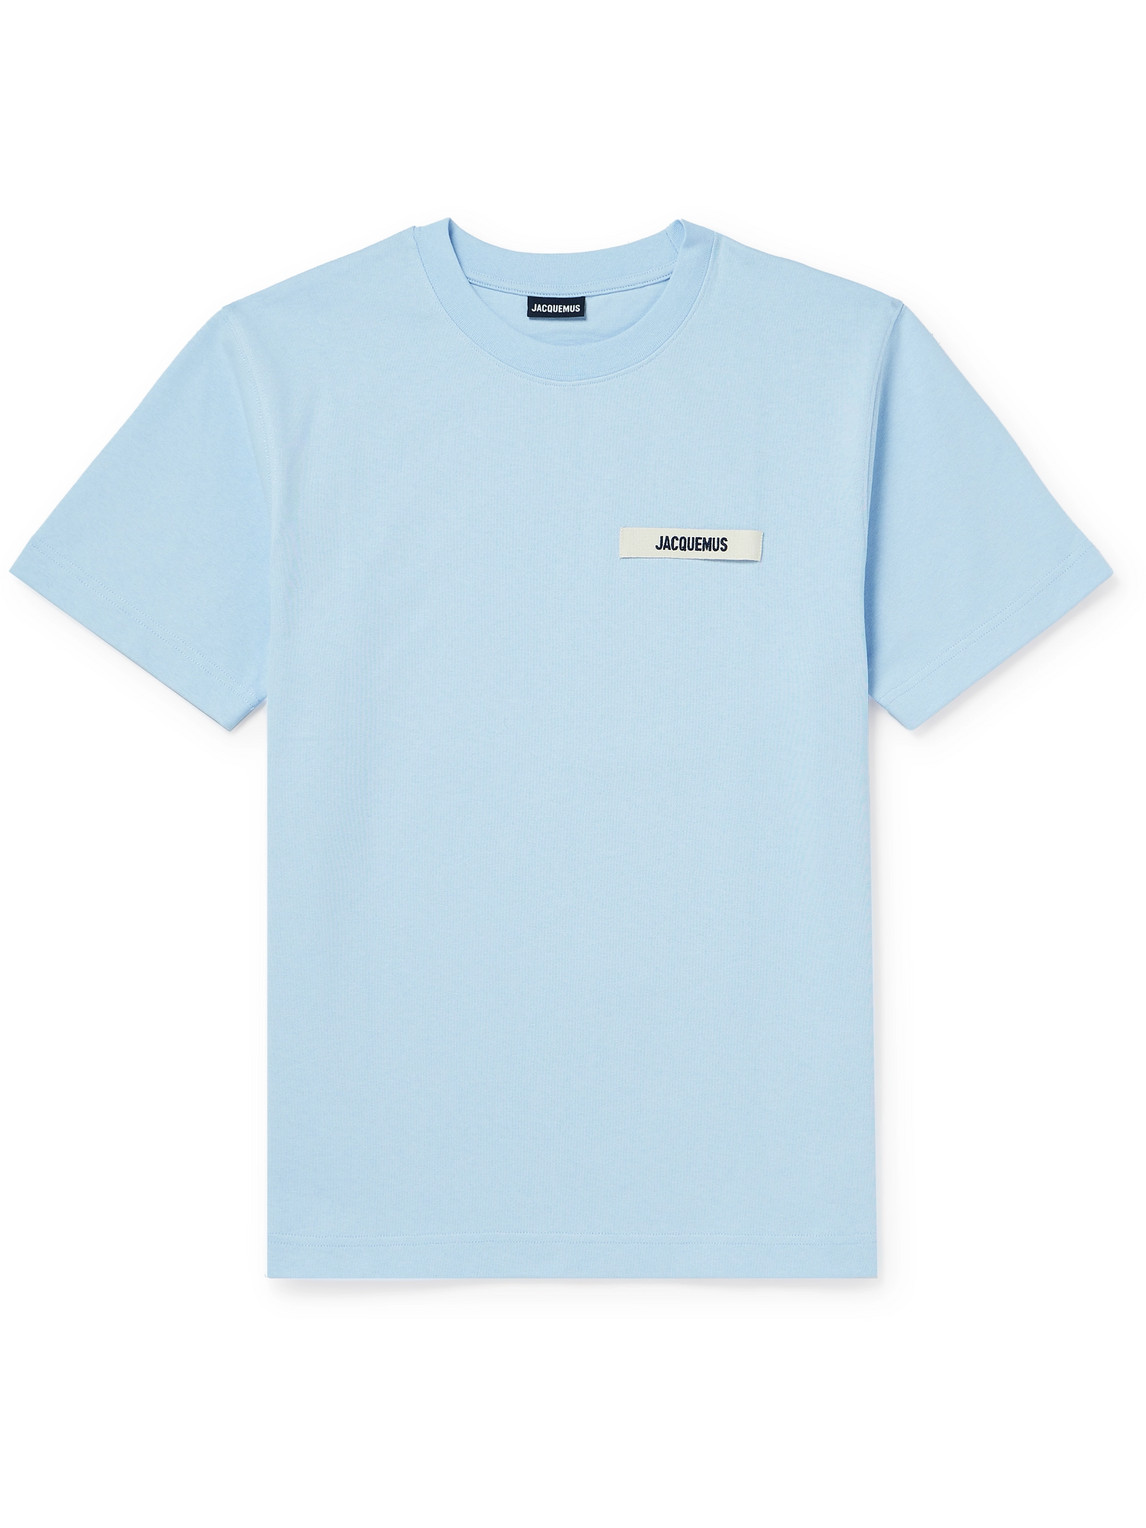 JACQUEMUS GROSGRAIN-TRIMMED LOGO-EMBROIDERED COTTON-JERSEY T-SHIRT